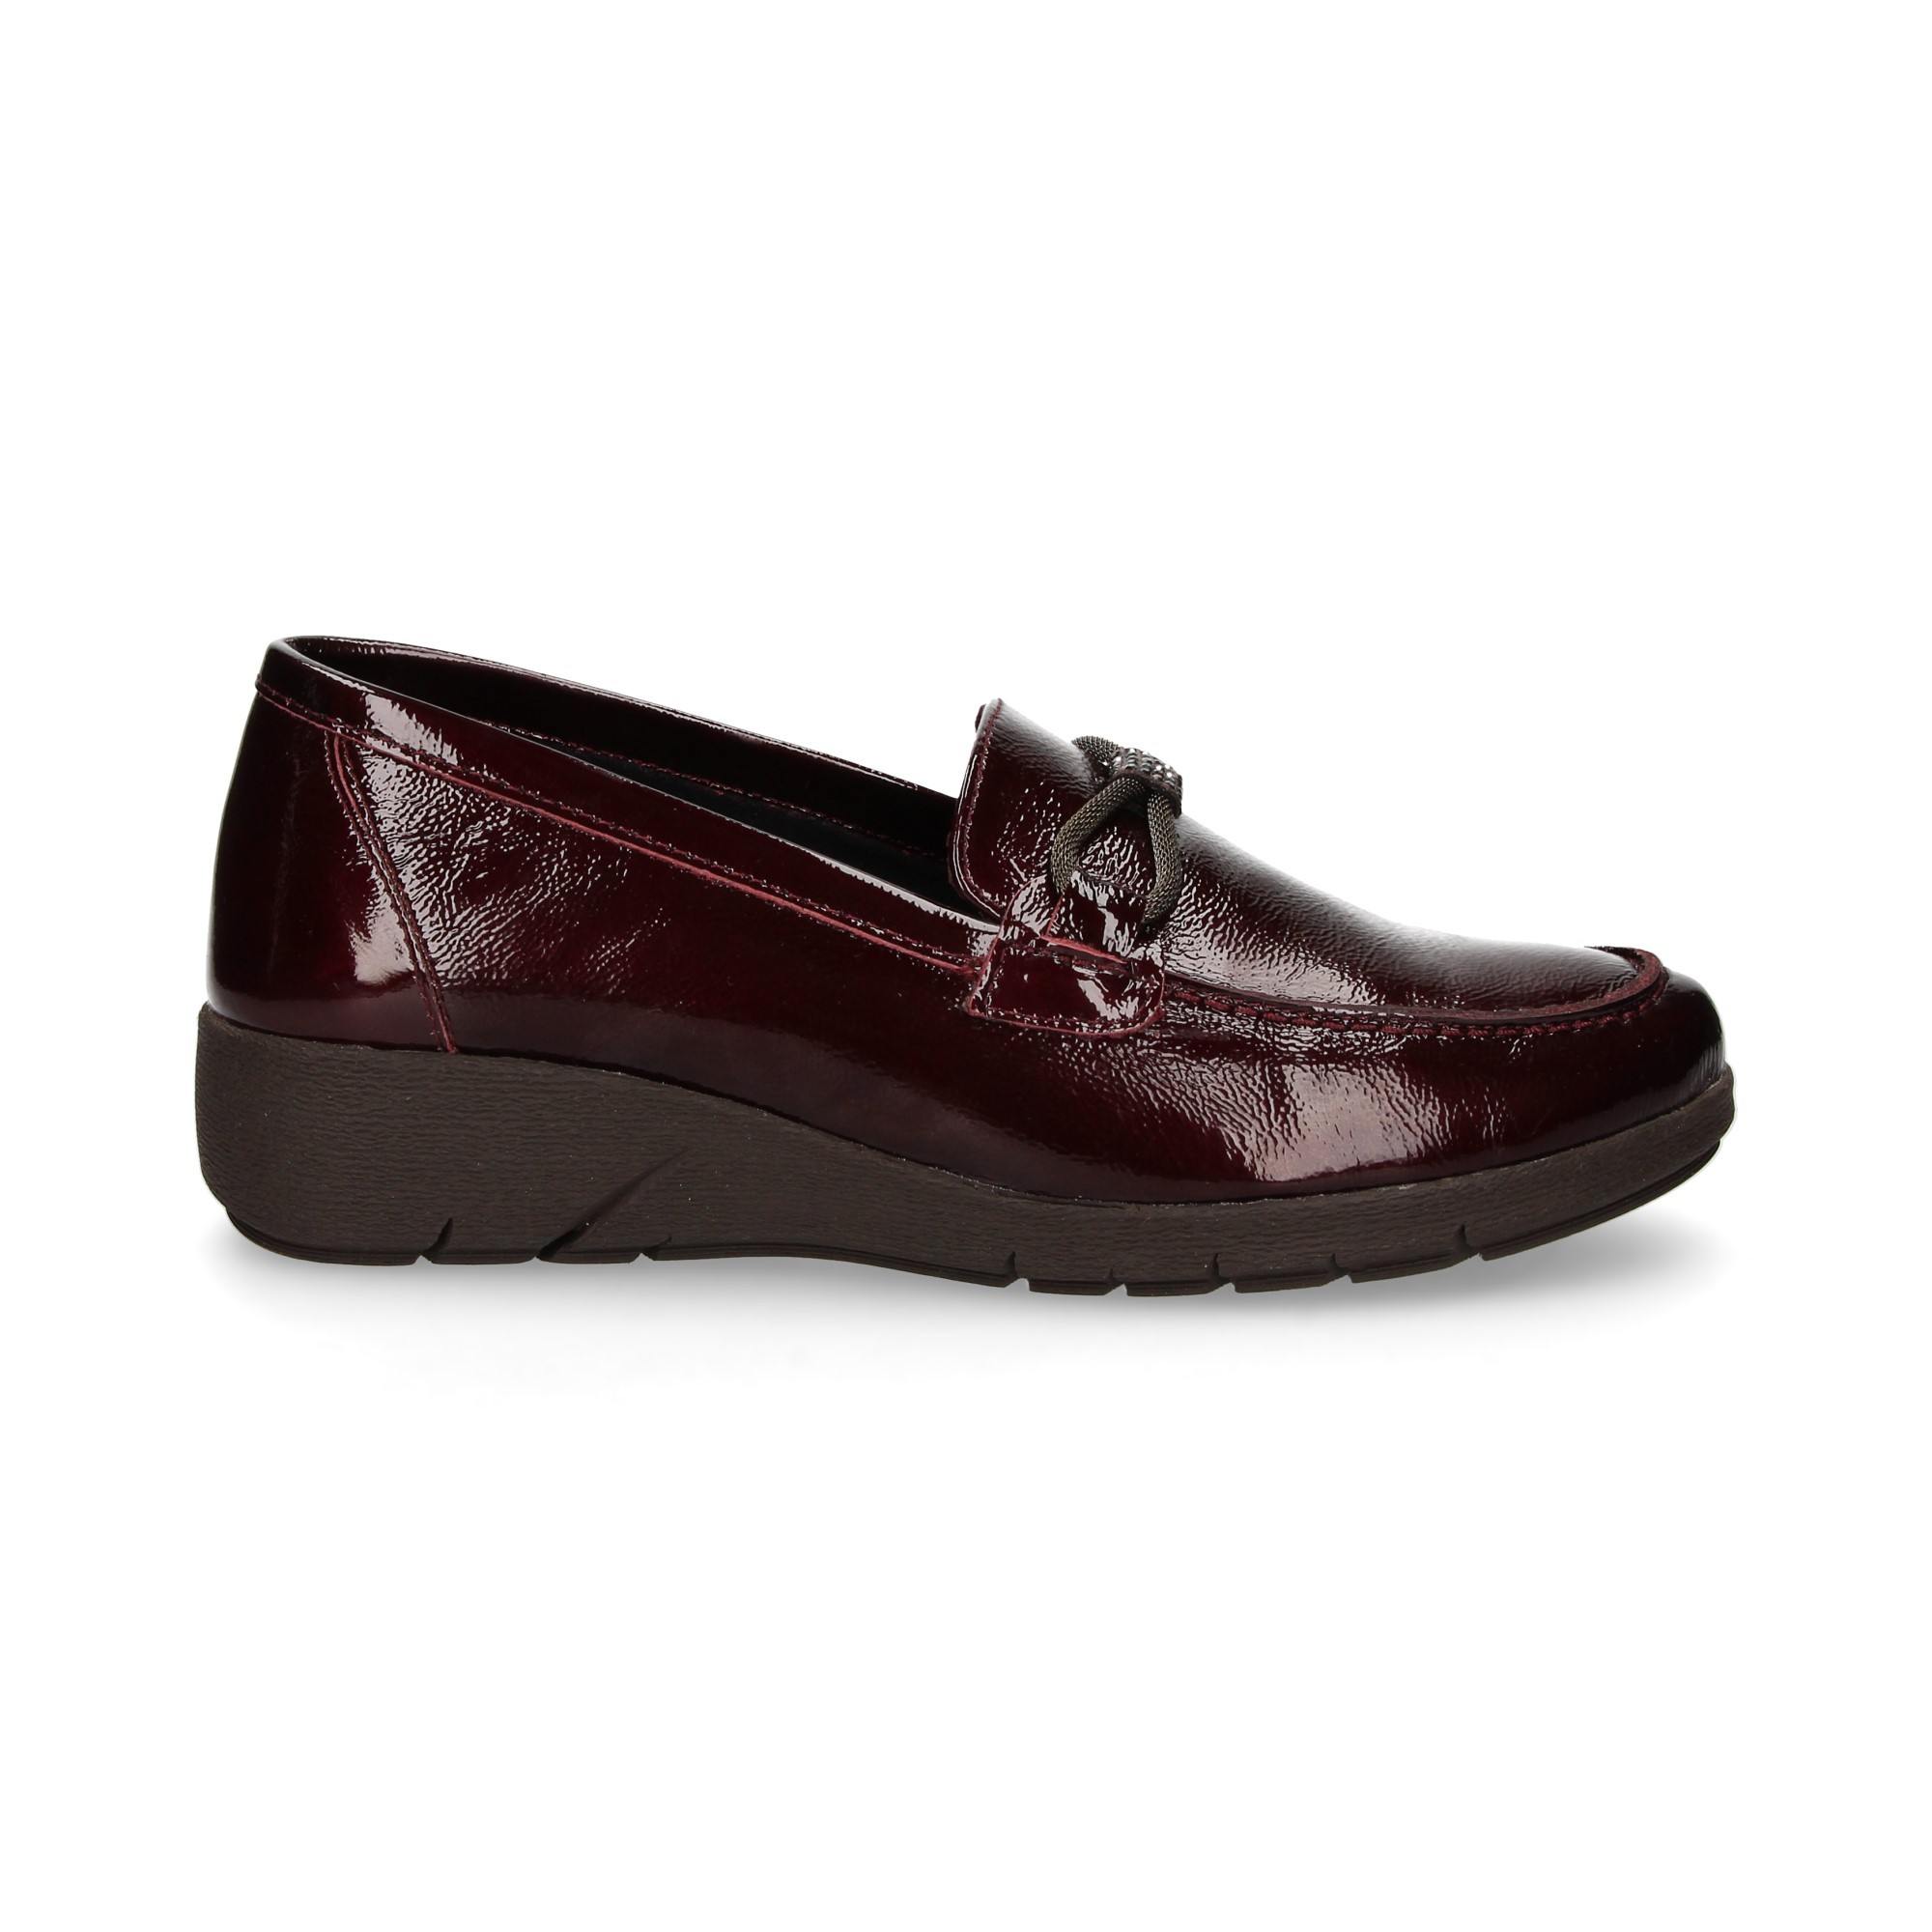 moccasin-wedge-link-strass-patent-leather-moccasin-bordeaux